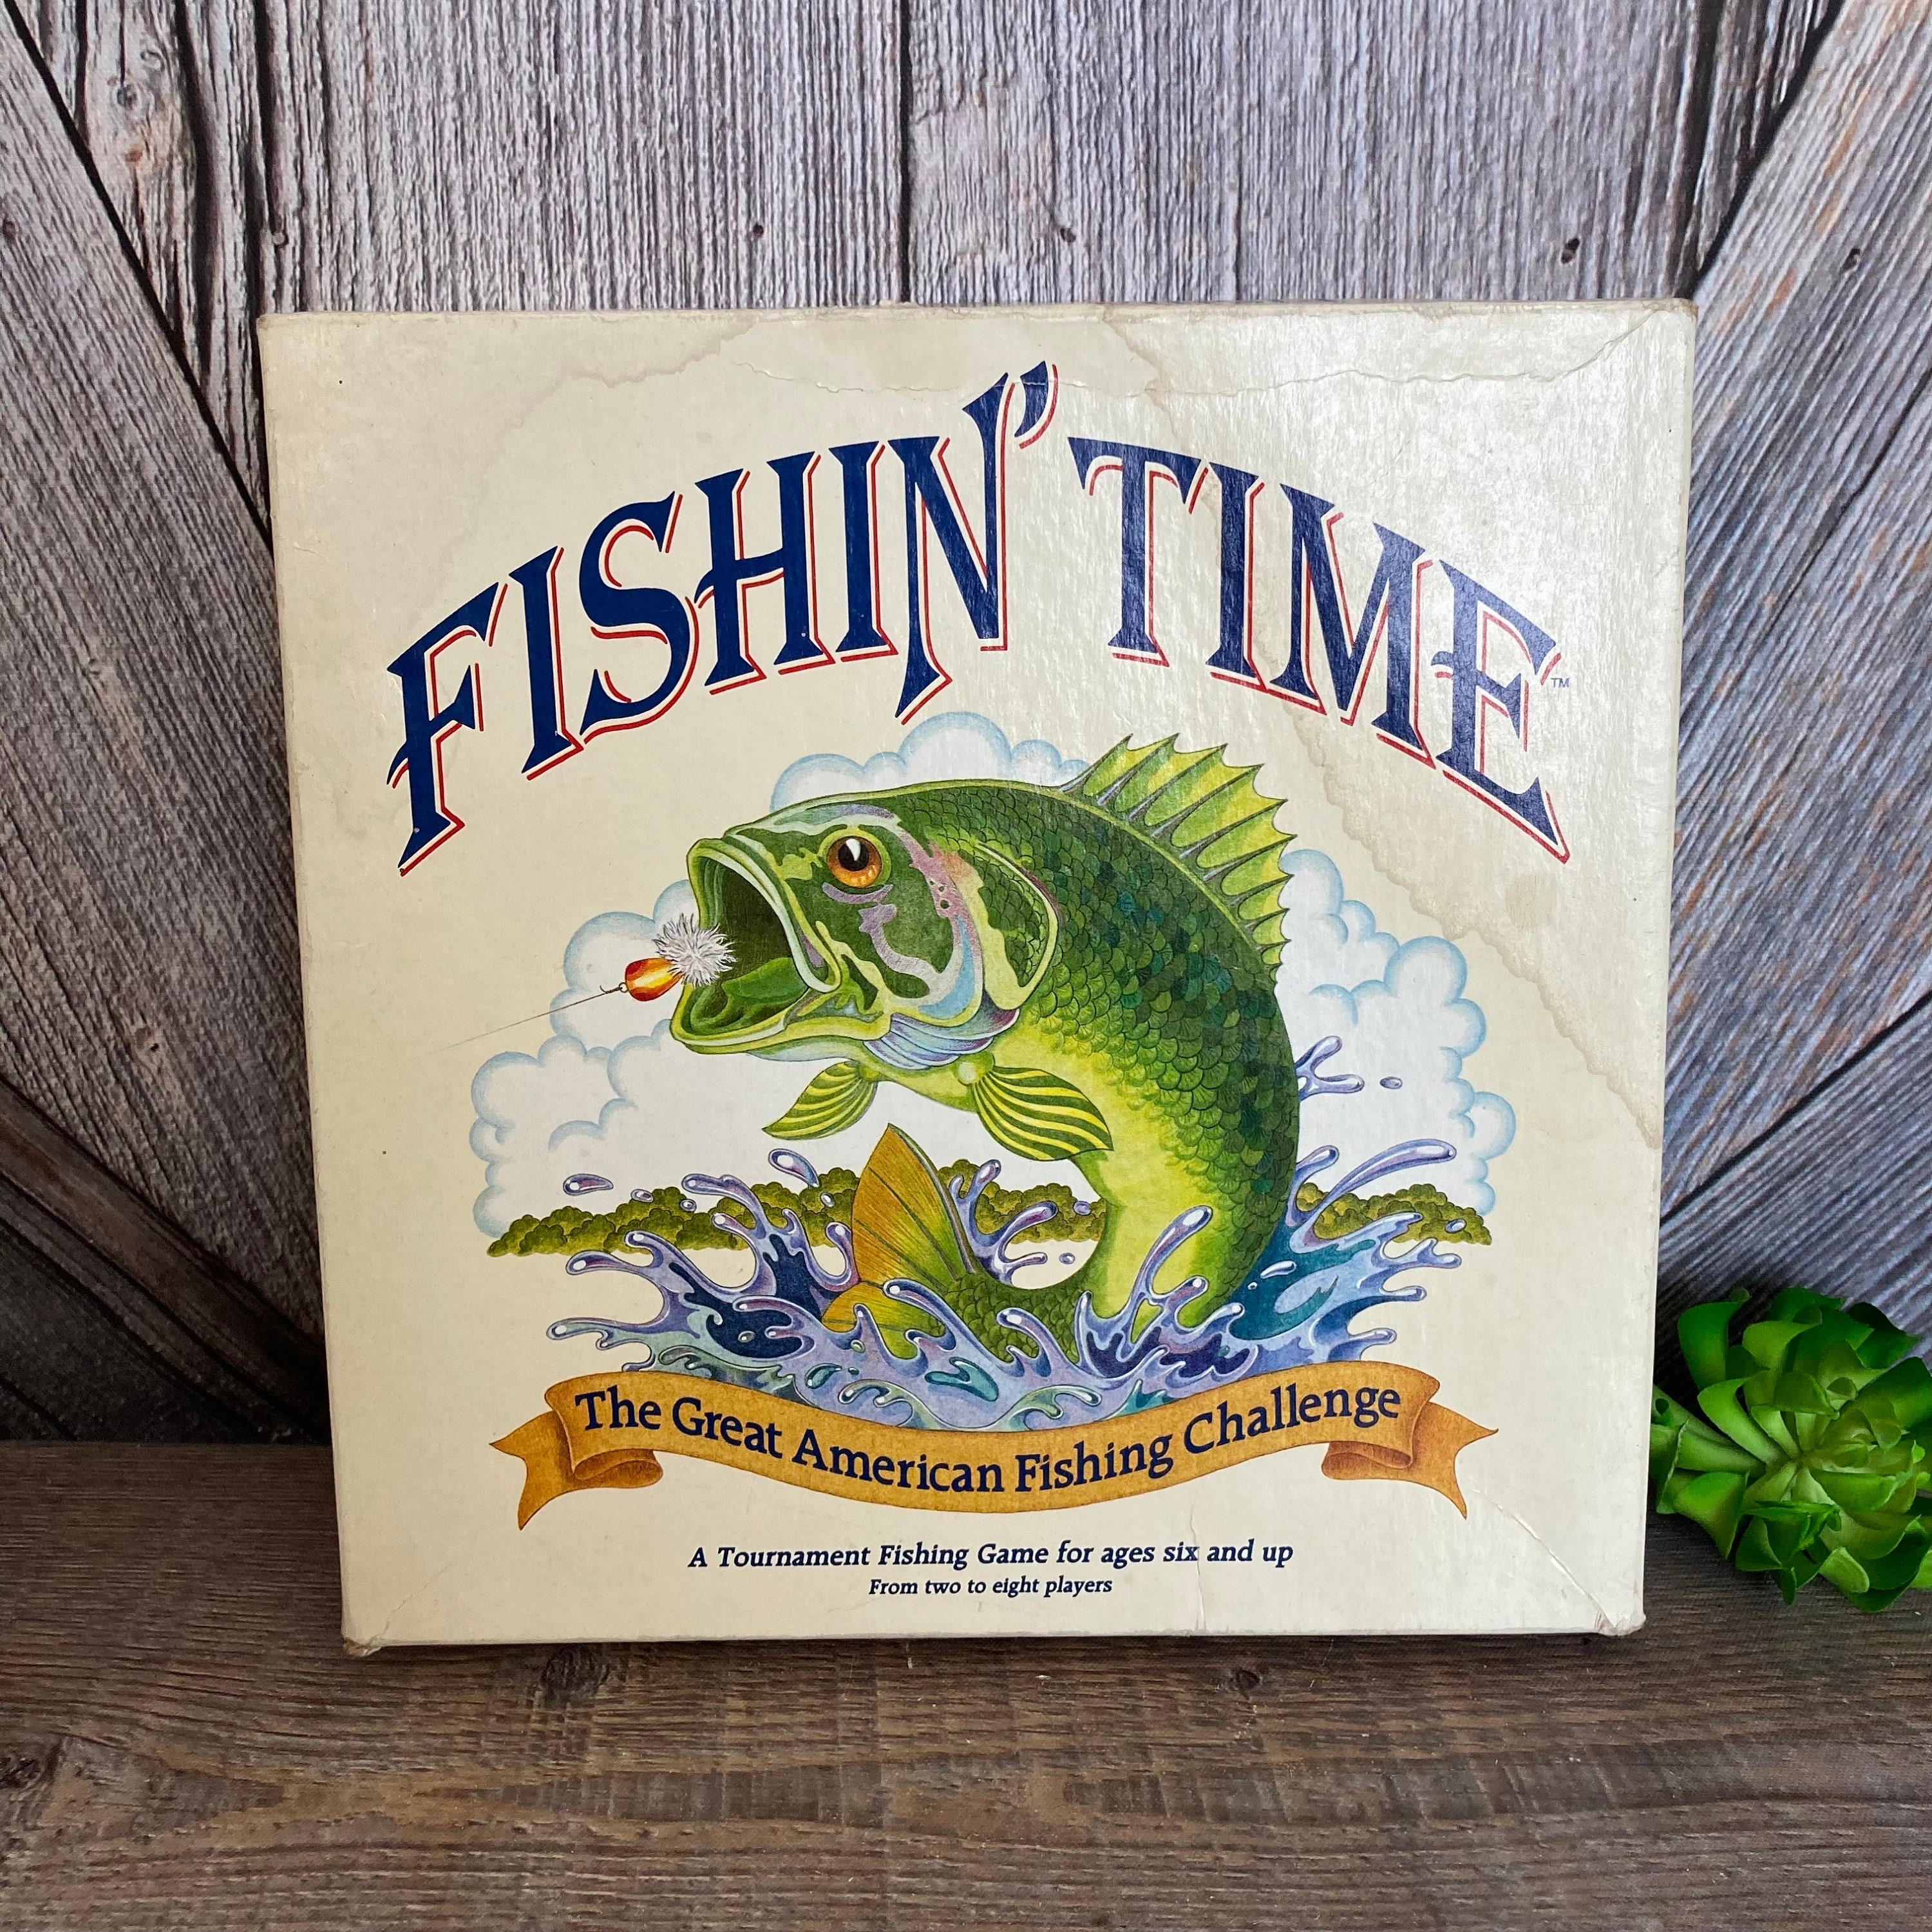 Vintage Fishin' Time Game, the Great American Fishing Challenge